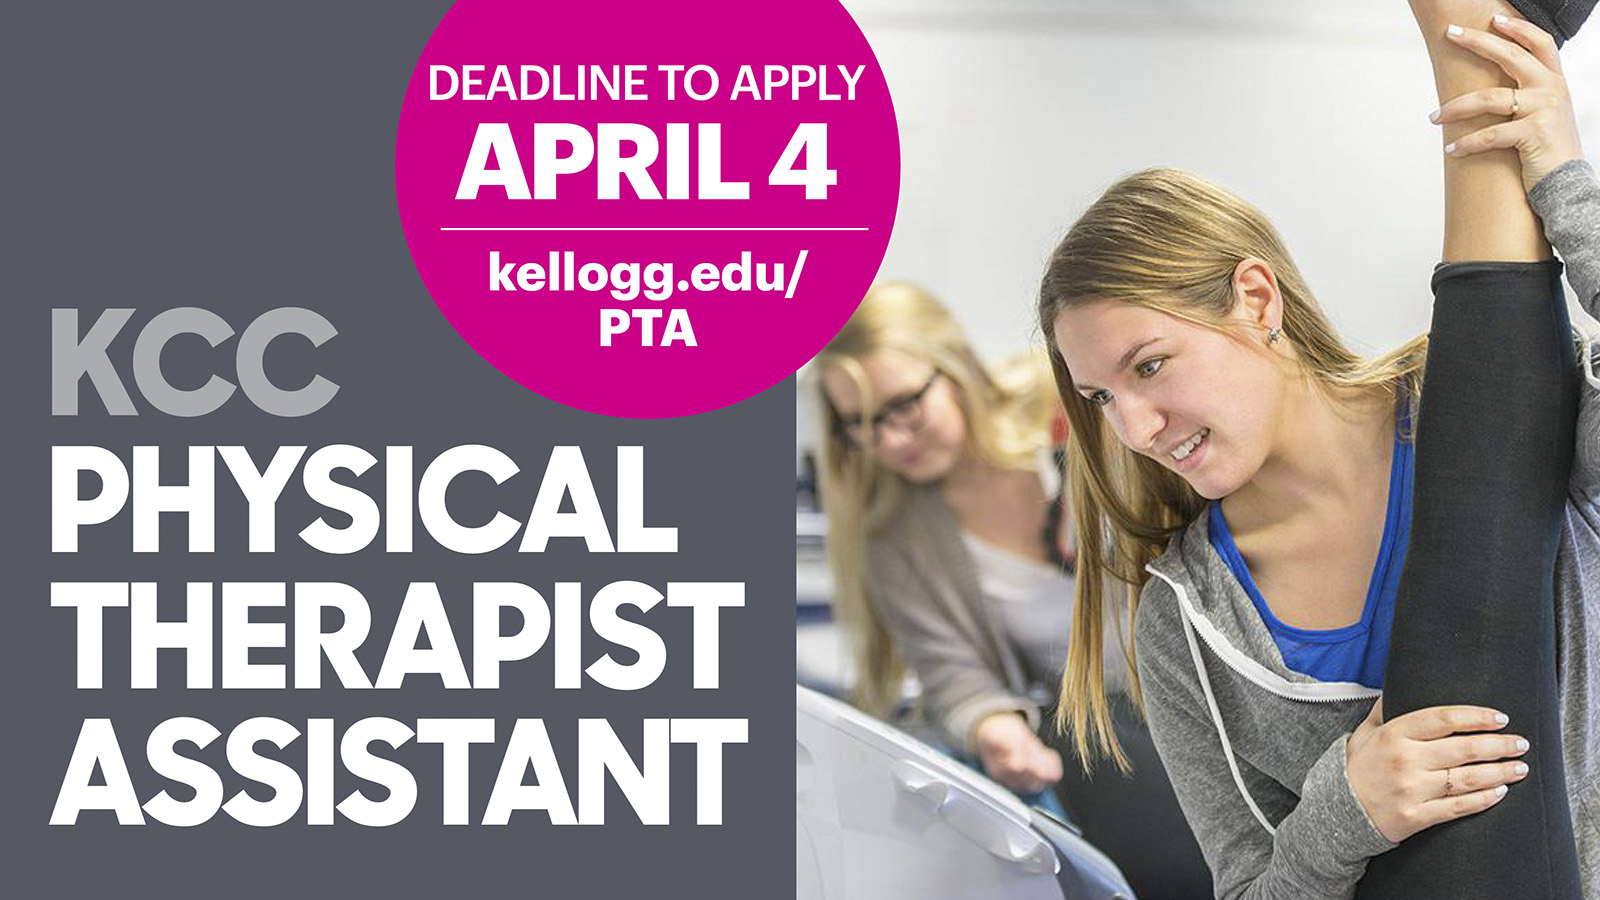 A PTA student helps someone stretch on a text slide that reads, "KCC Physical Therapist Assistant. Deadline to apply April 4. kellogg.edu/pta."